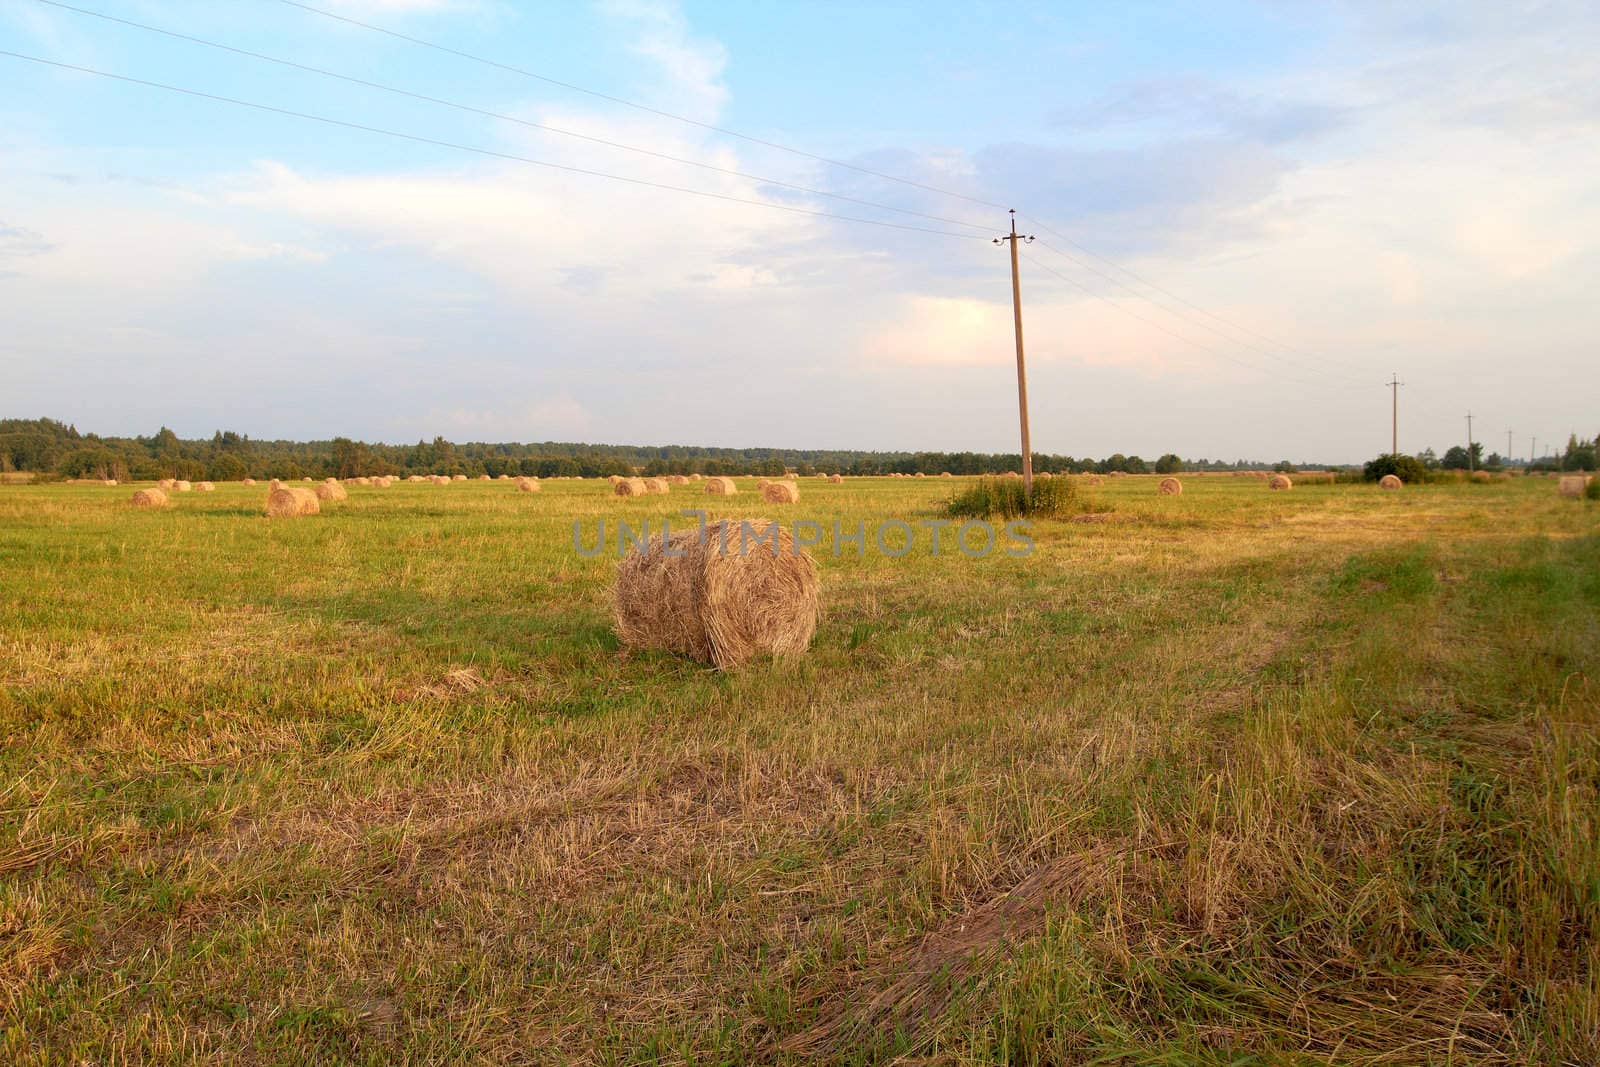 hay bales in a field in a summer evening